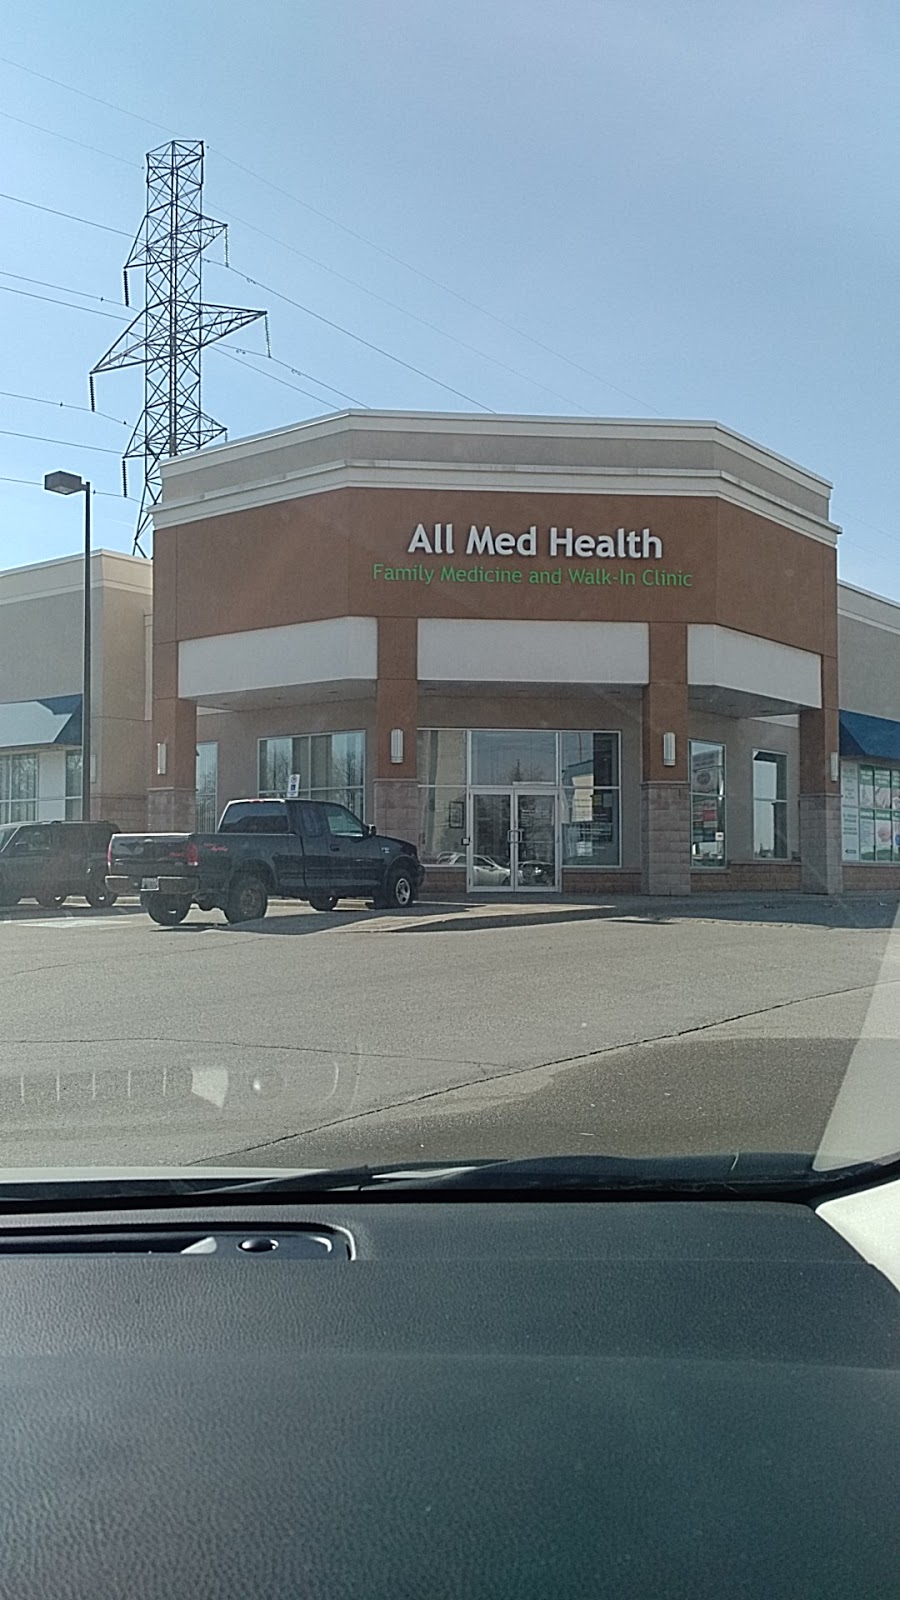 All Med Health Family Medicine and Walk-In Clinic | doctor | 16880 Yonge St #1, Newmarket, ON L3Y 0A3, Canada | 9058959777 OR +1 905-895-9777